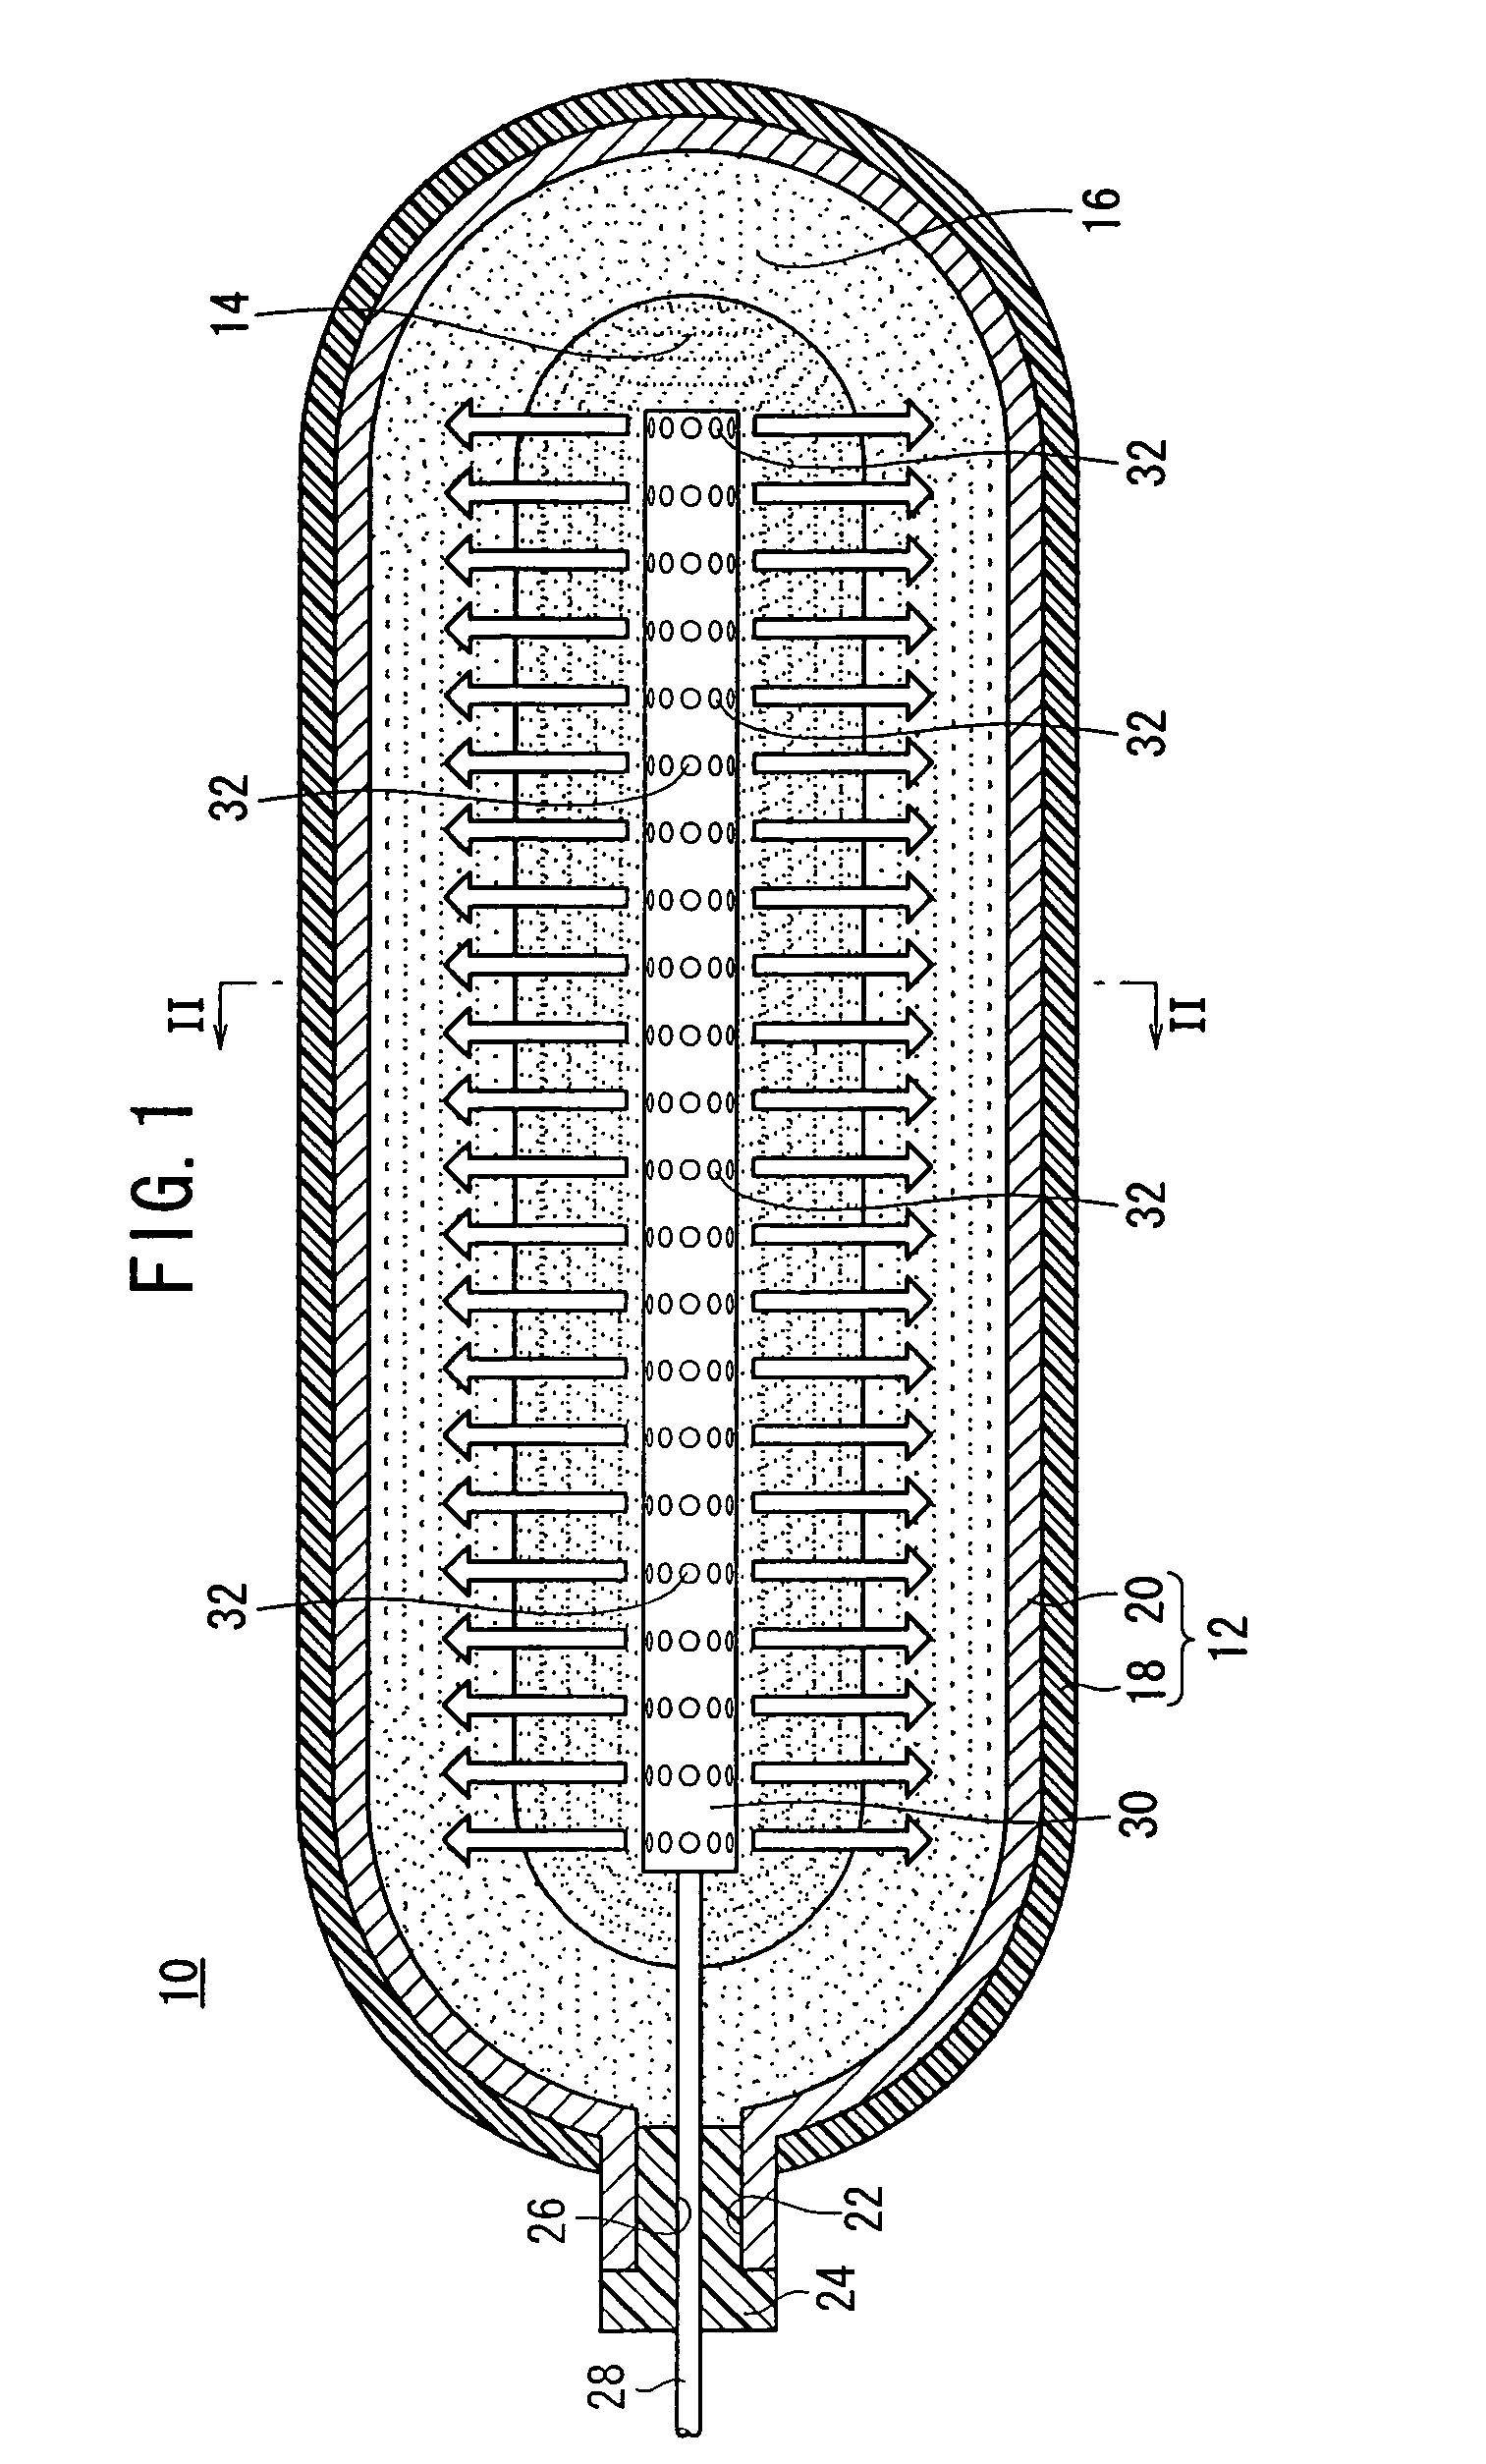 Gas storage container with gas absorbing or adsorbing material